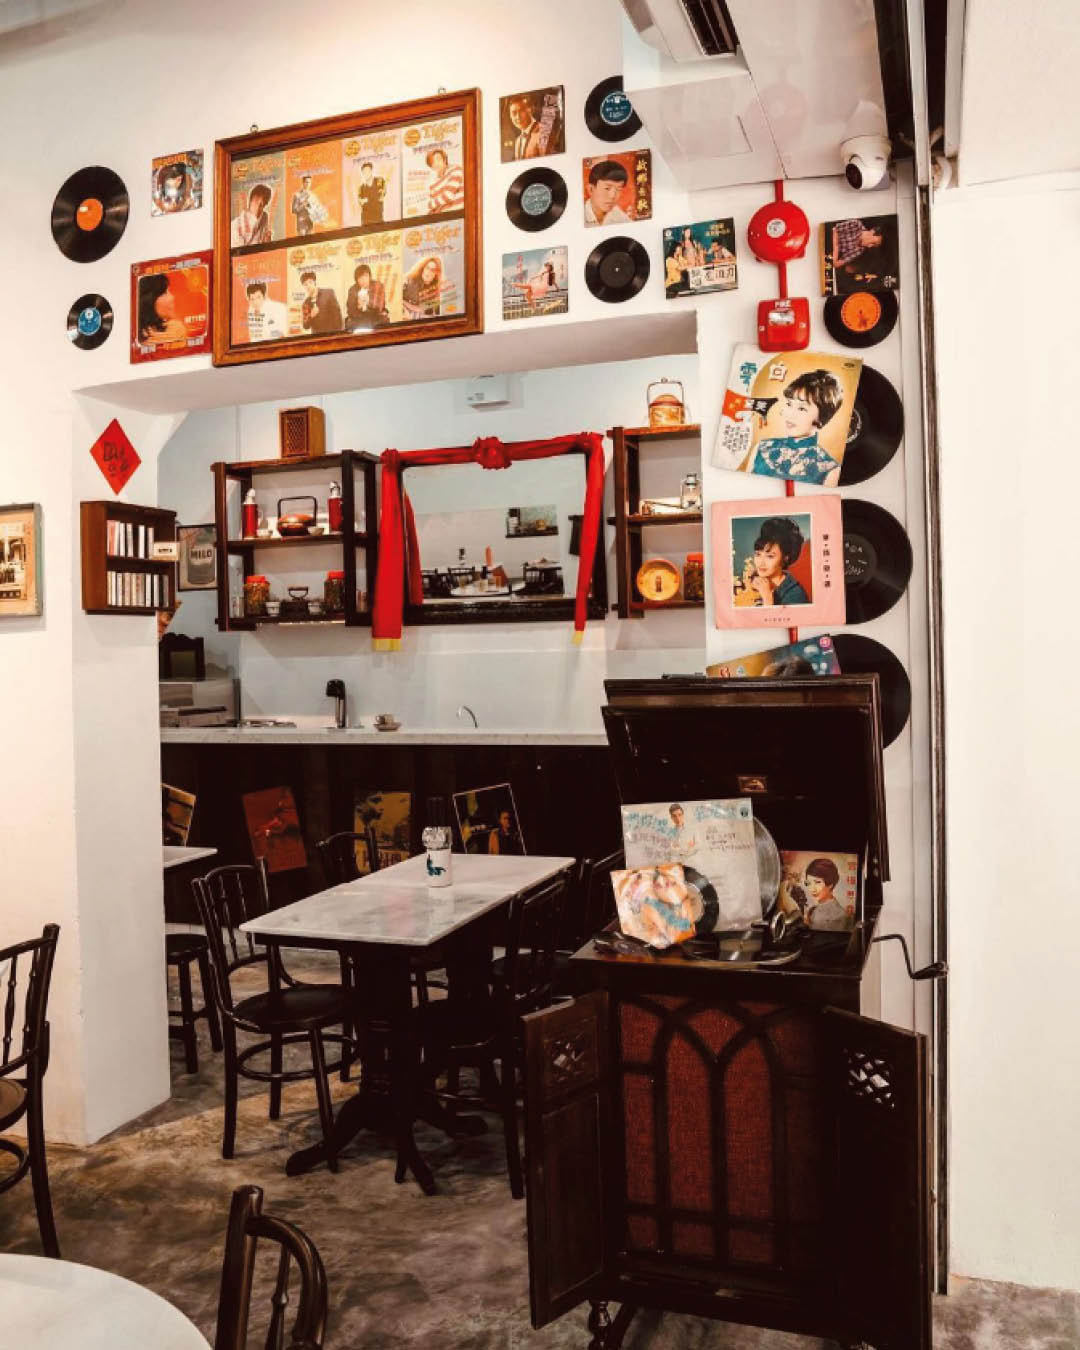 Record sleeves and other memorabilia decorate the walls at Great Nanyang Heritage Cafe.